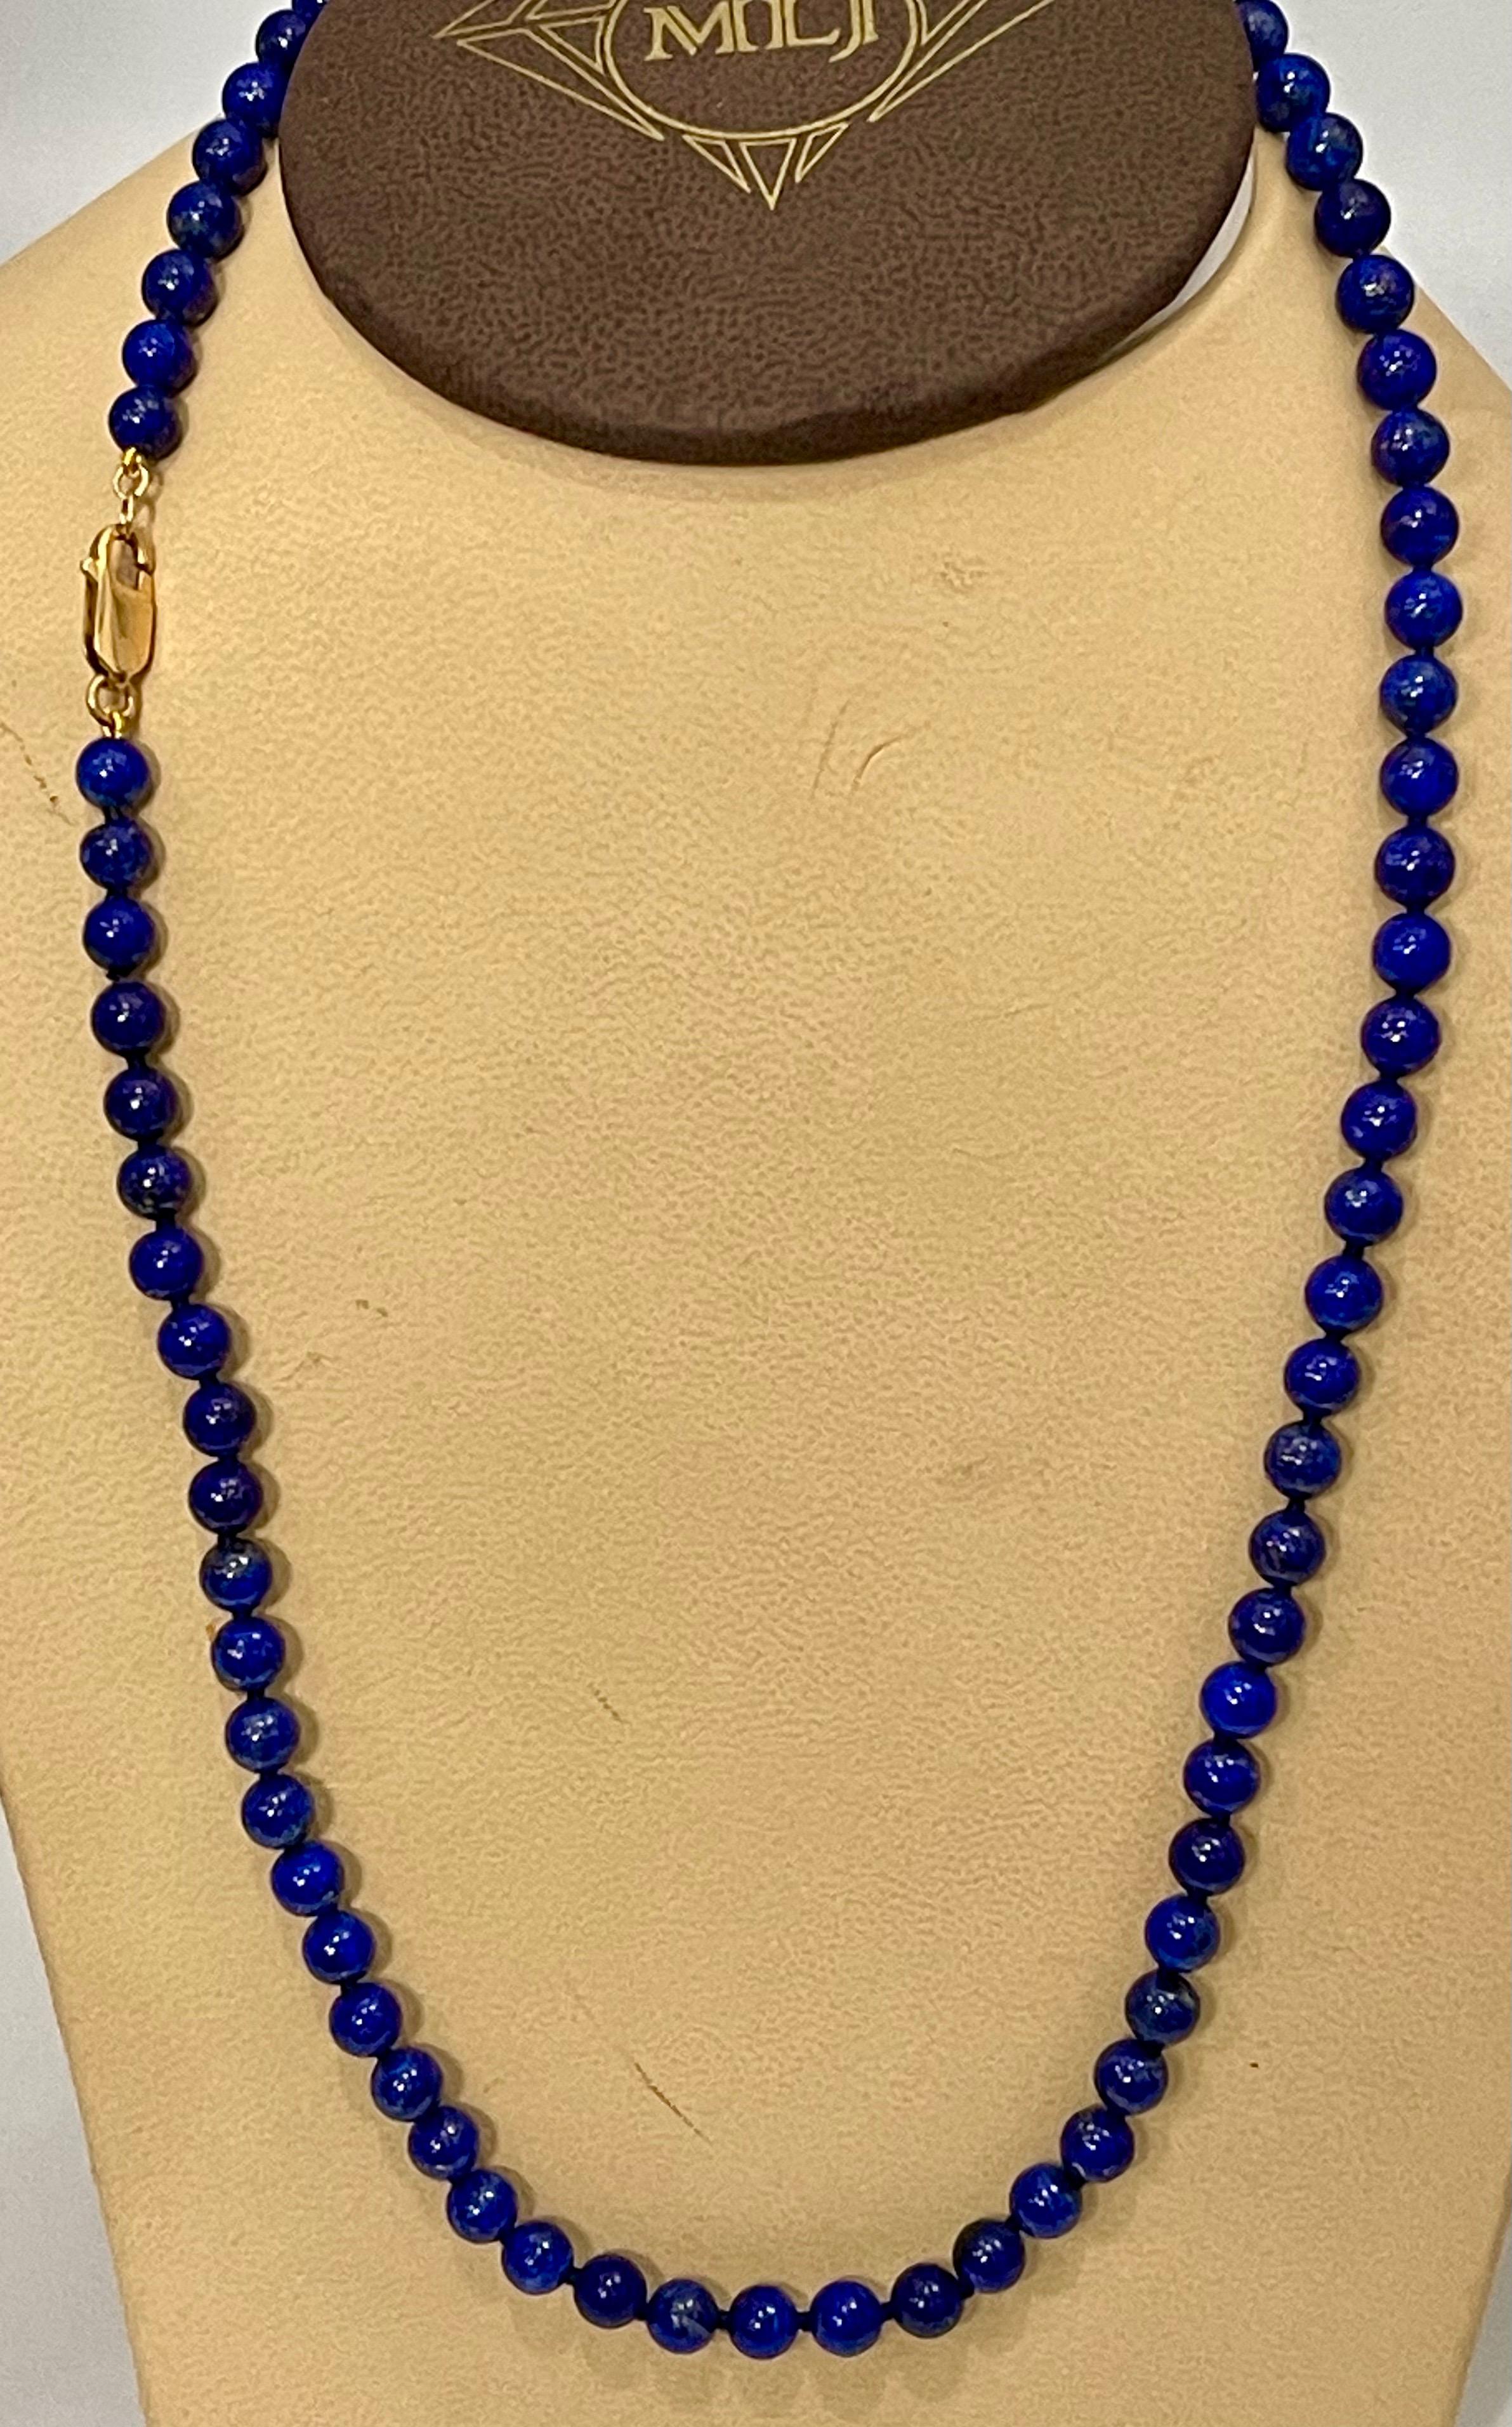 Vintage Lapis Lazuli Single Strand Necklace With 14 Karat Yellow Gold  heavy yellow gold lobster clasp
This marvelous vintage Lapis Lazuli  necklace features 1 row of luscious  Beads
(measuring approximately average  6.5 mm)  
strand is 21 inches